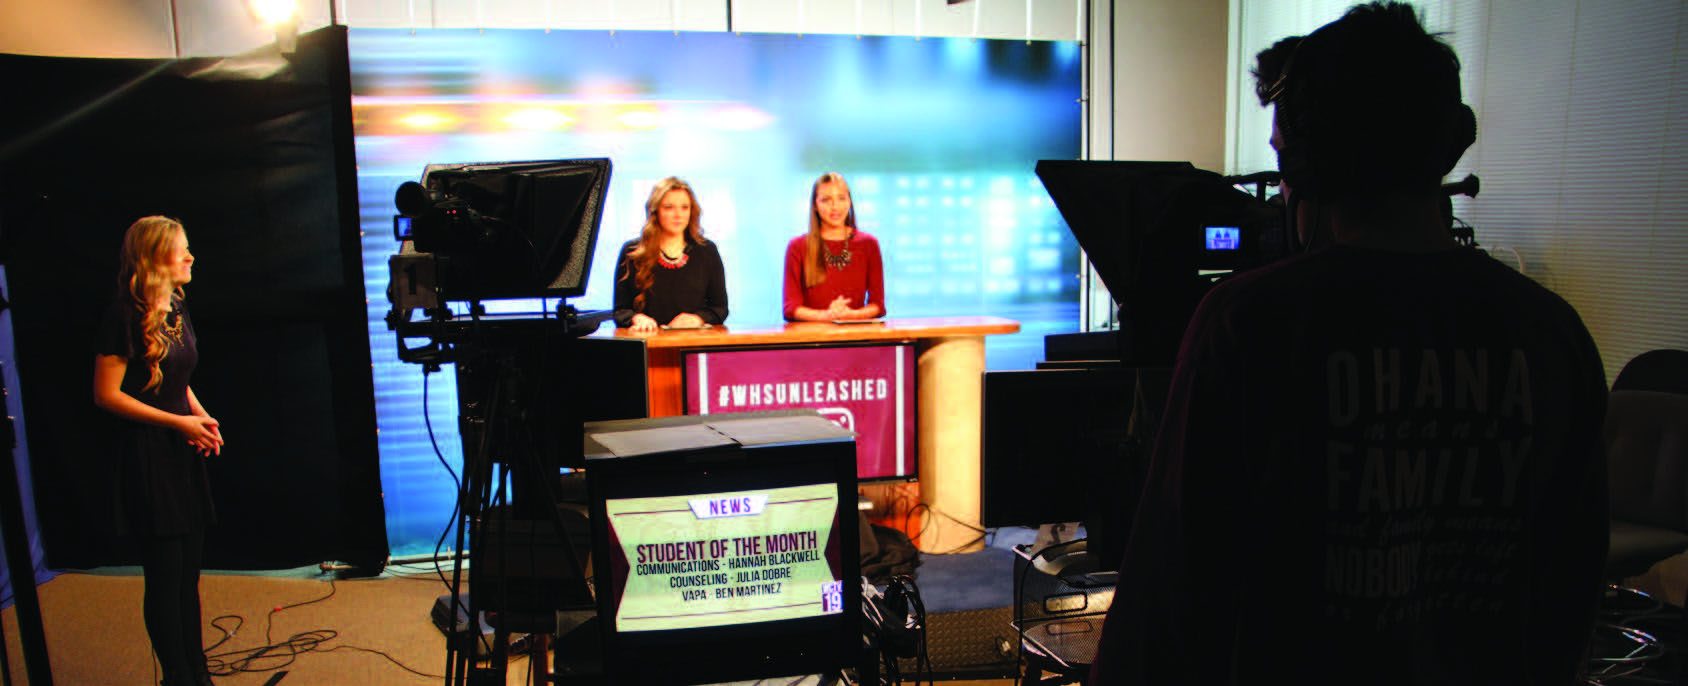 Whitney High School uses resourcefulness and ingenuity—and capable, cost-efficient tools like Wirecast—to advance an impressive broadcast media program